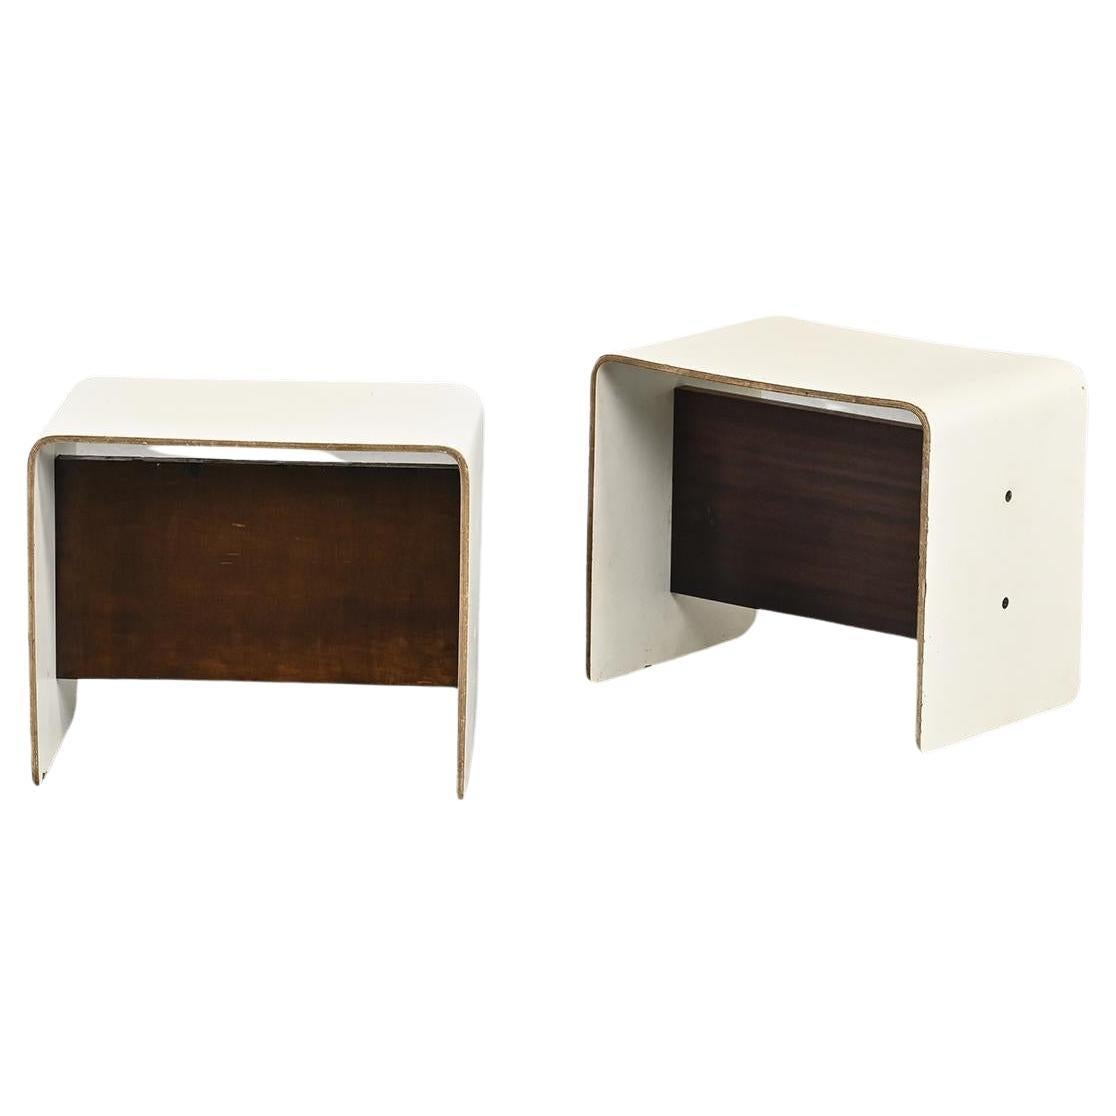  Pair of Bedside Tables by Pierre Guariche, circa 1968